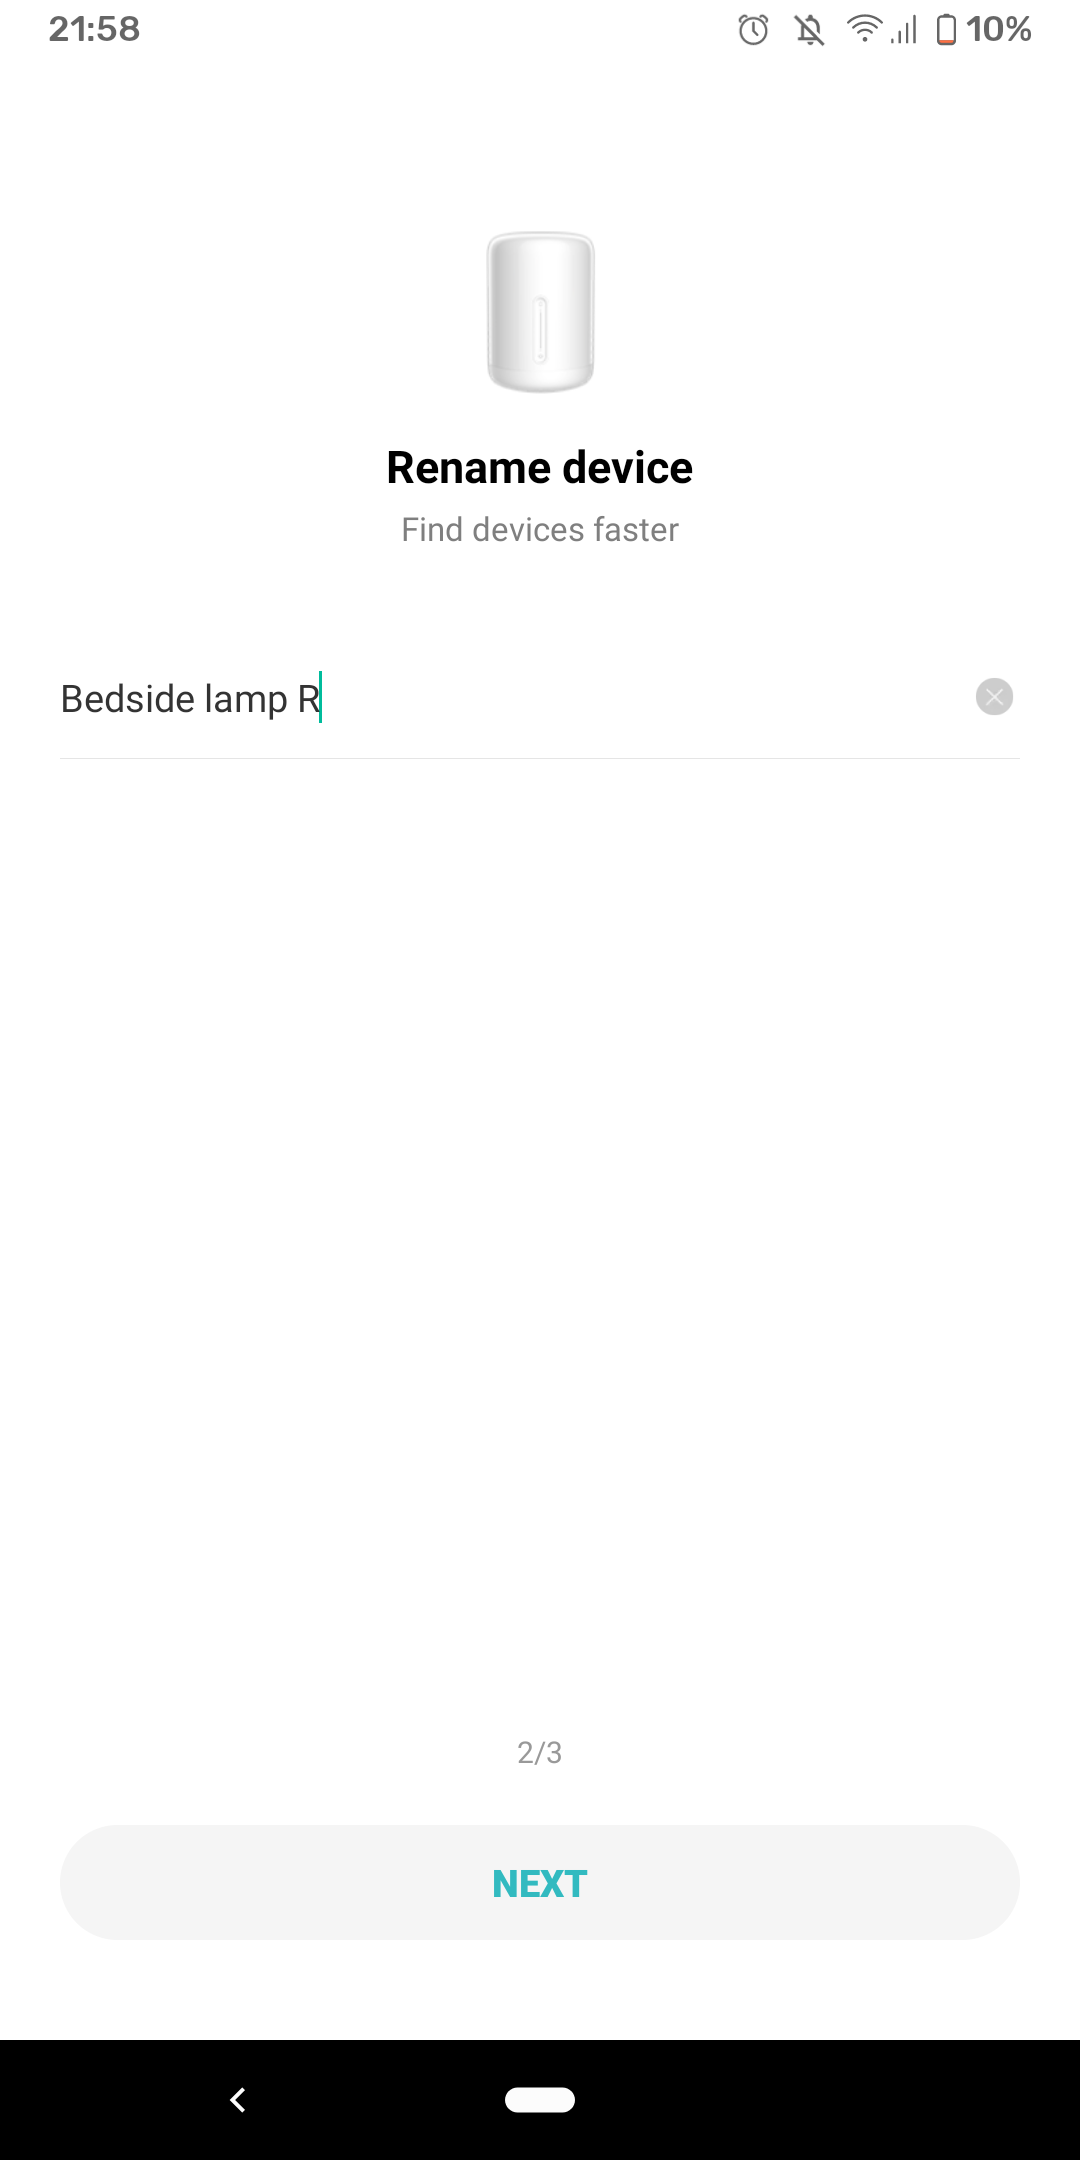 Adding a new device to Xiaomi Home, rename device